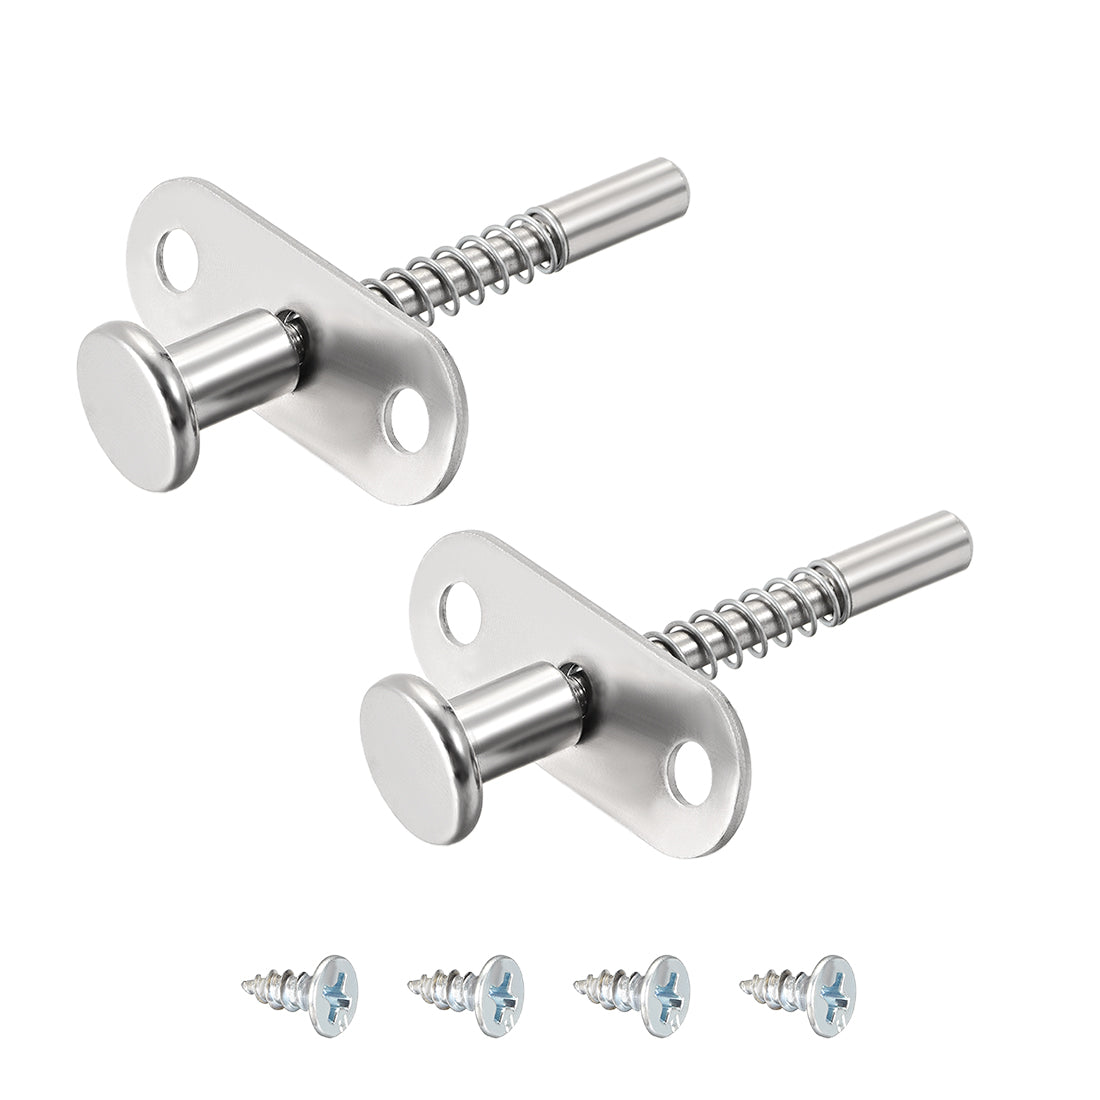 uxcell Uxcell Plunger Latches Spring-loaded Stainless Steel 6mm Dia Head 6mm Dia Spring 60mm Total Length , 2pcs